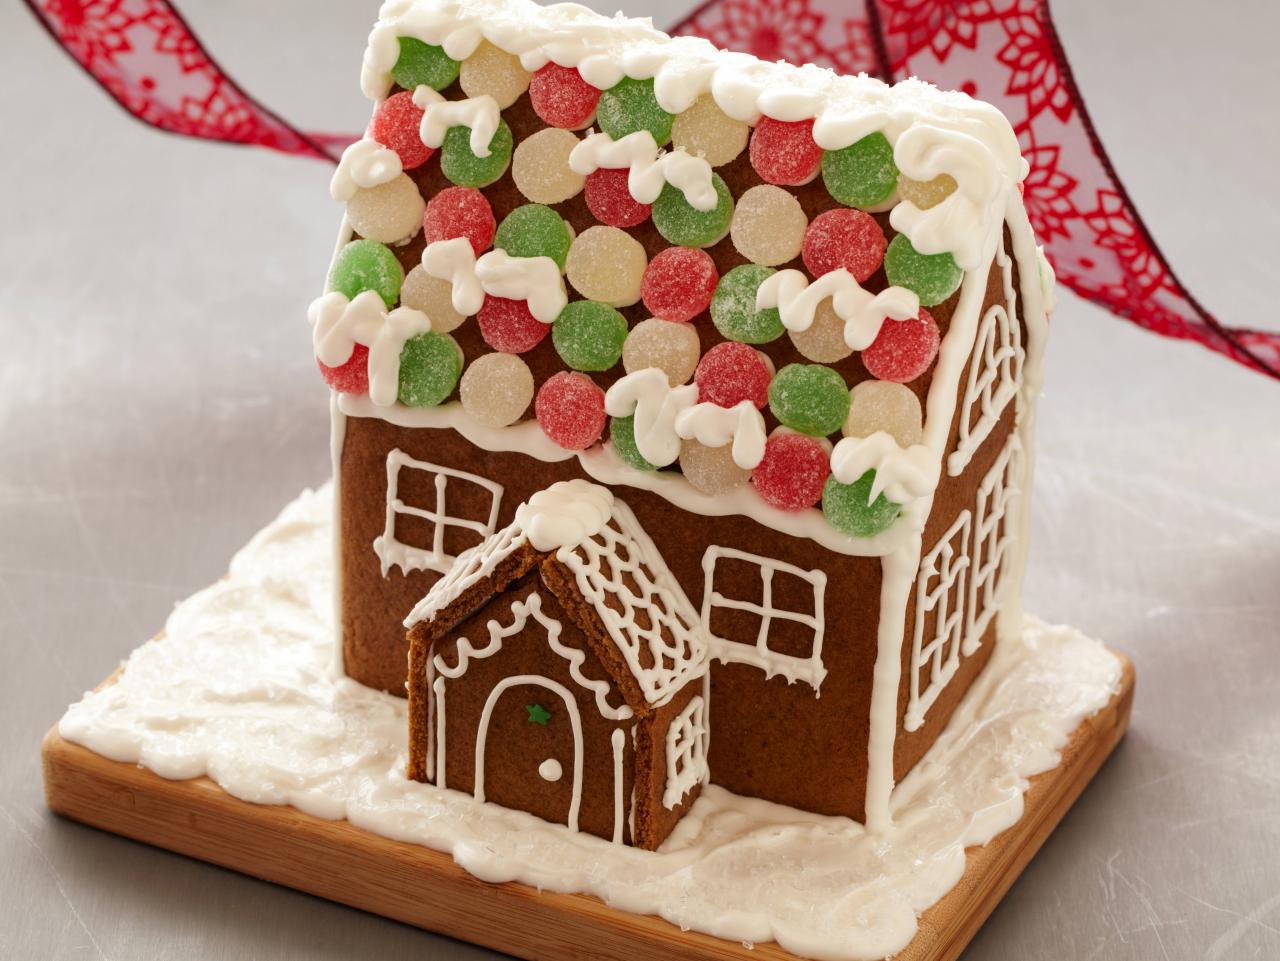 Easy Way to Make a Gingerbread House : Food Network, FN Dish -  Behind-the-Scenes, Food Trends, and Best Recipes : Food Network